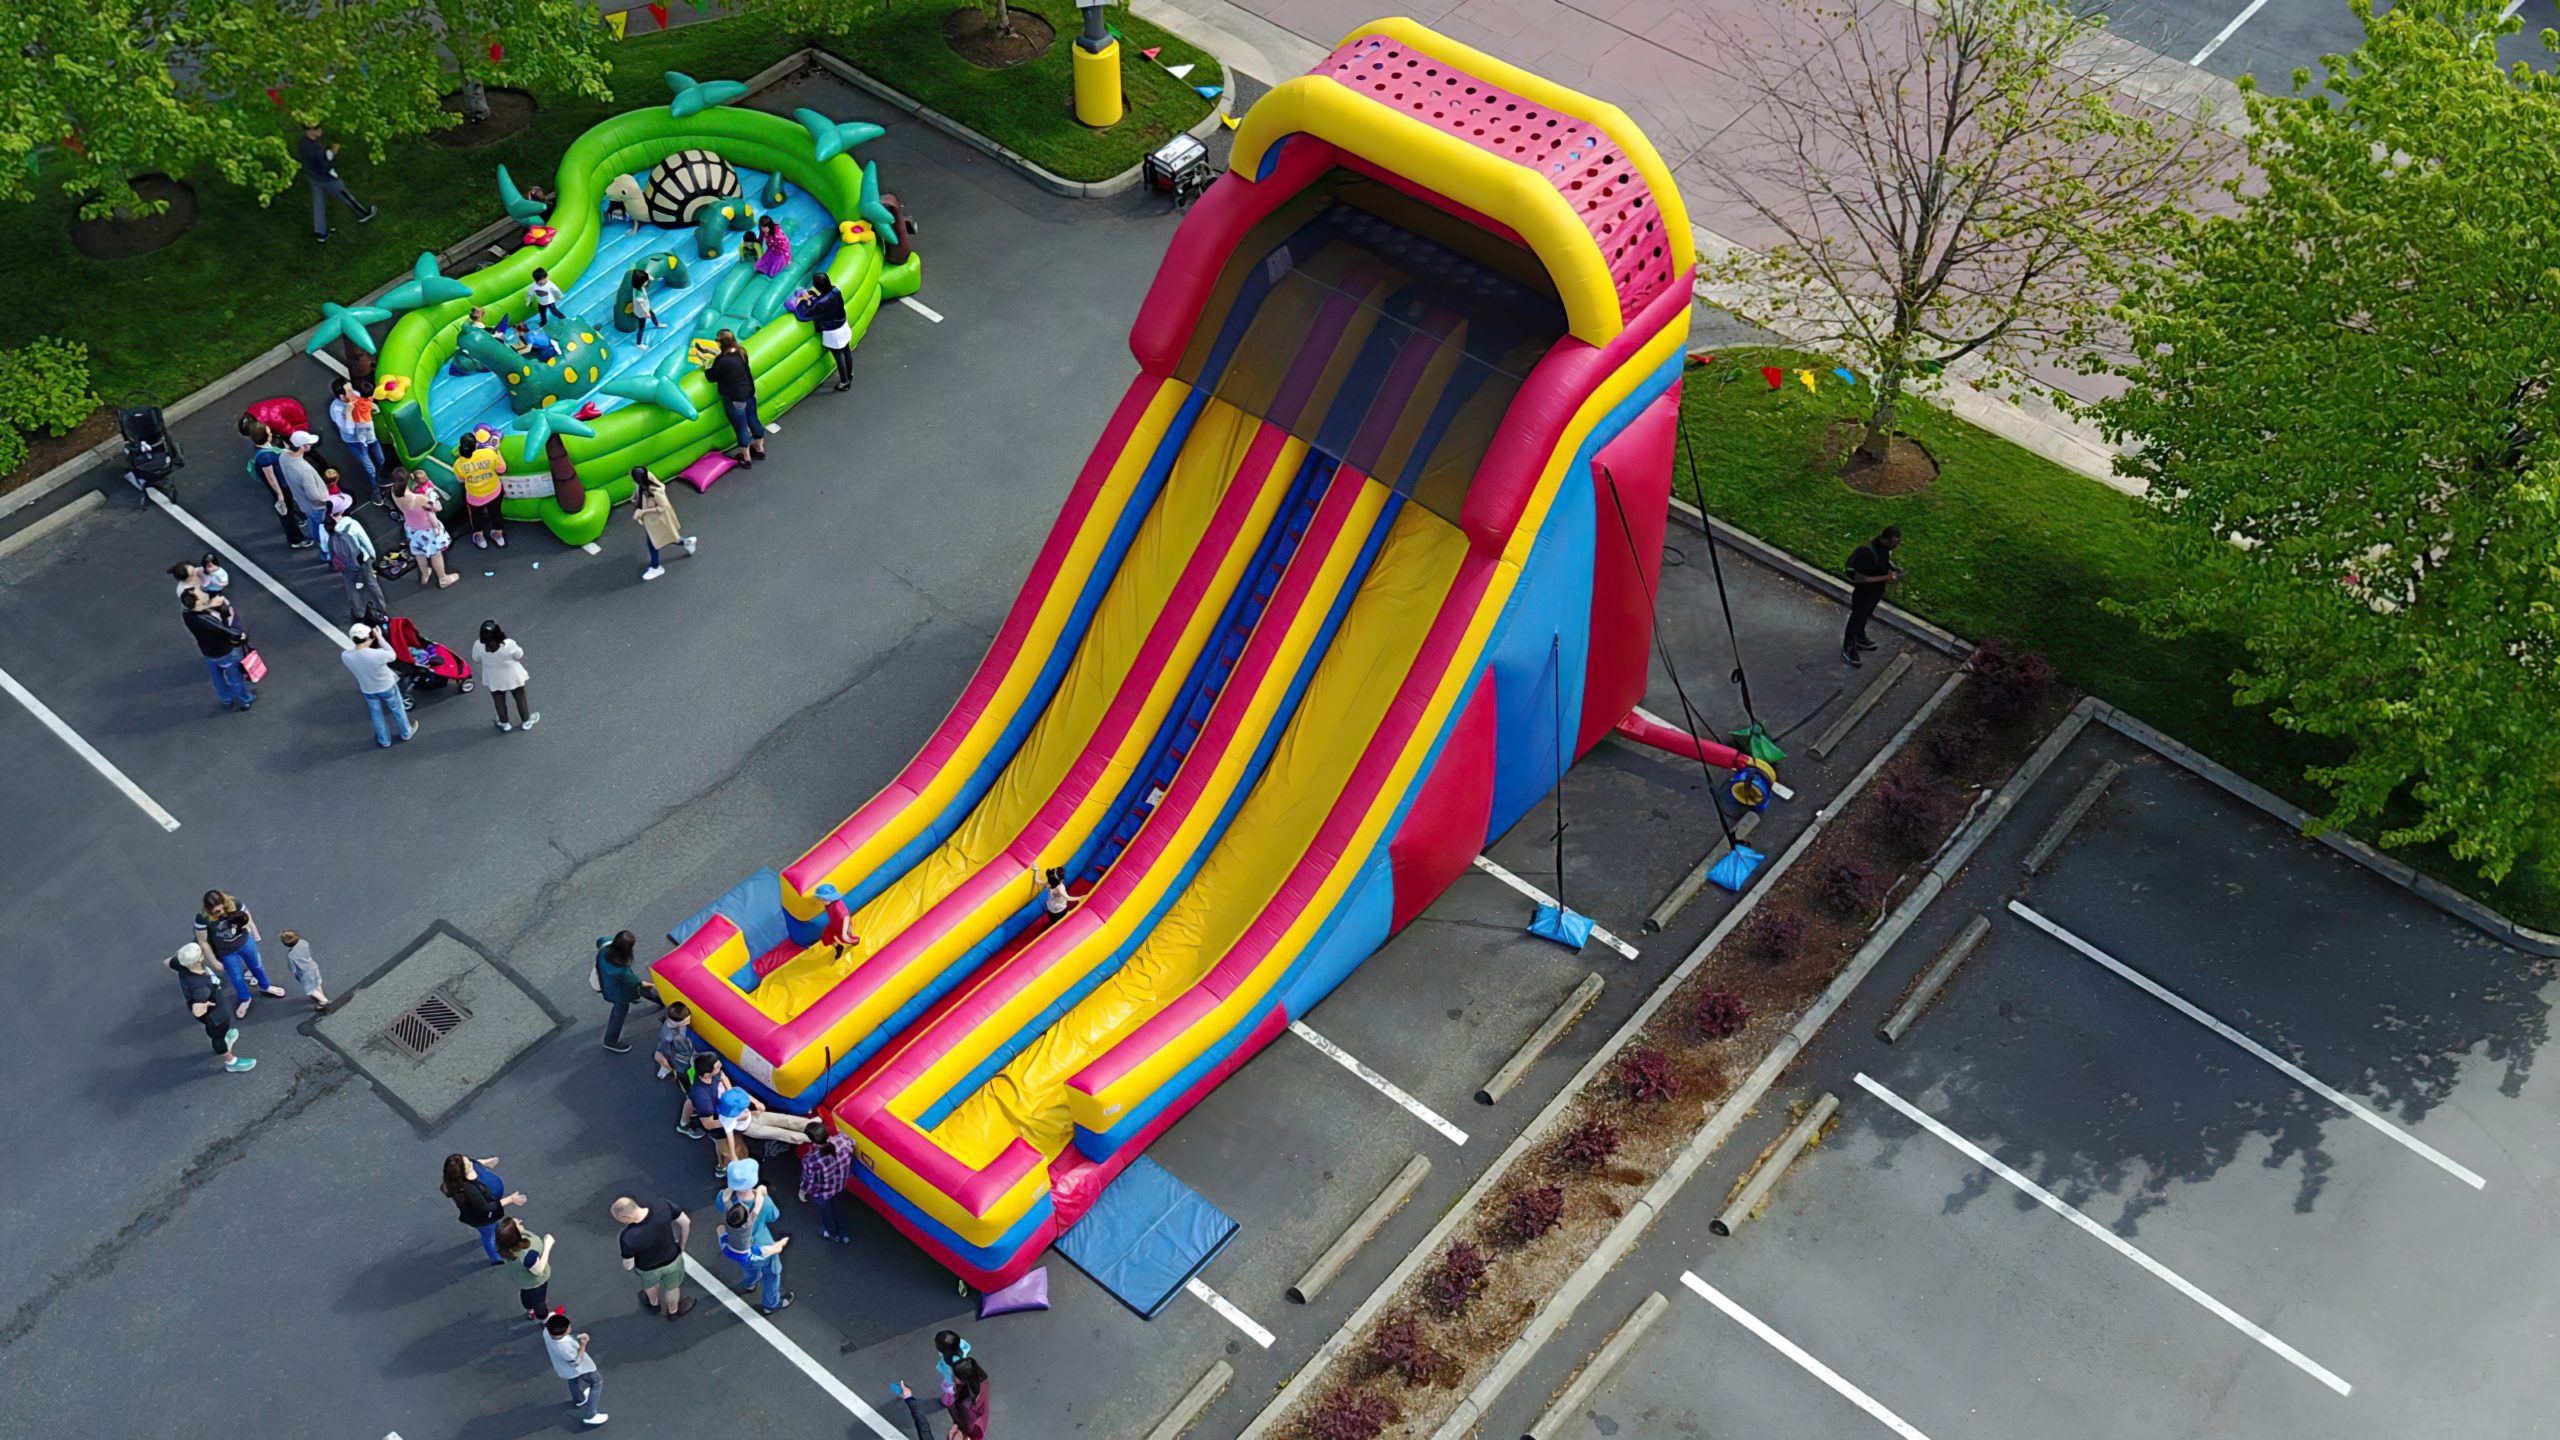 Overhead view of a giant slide in a parking lot next to a kids inflatable play jump and parents watching their kids play at an event.